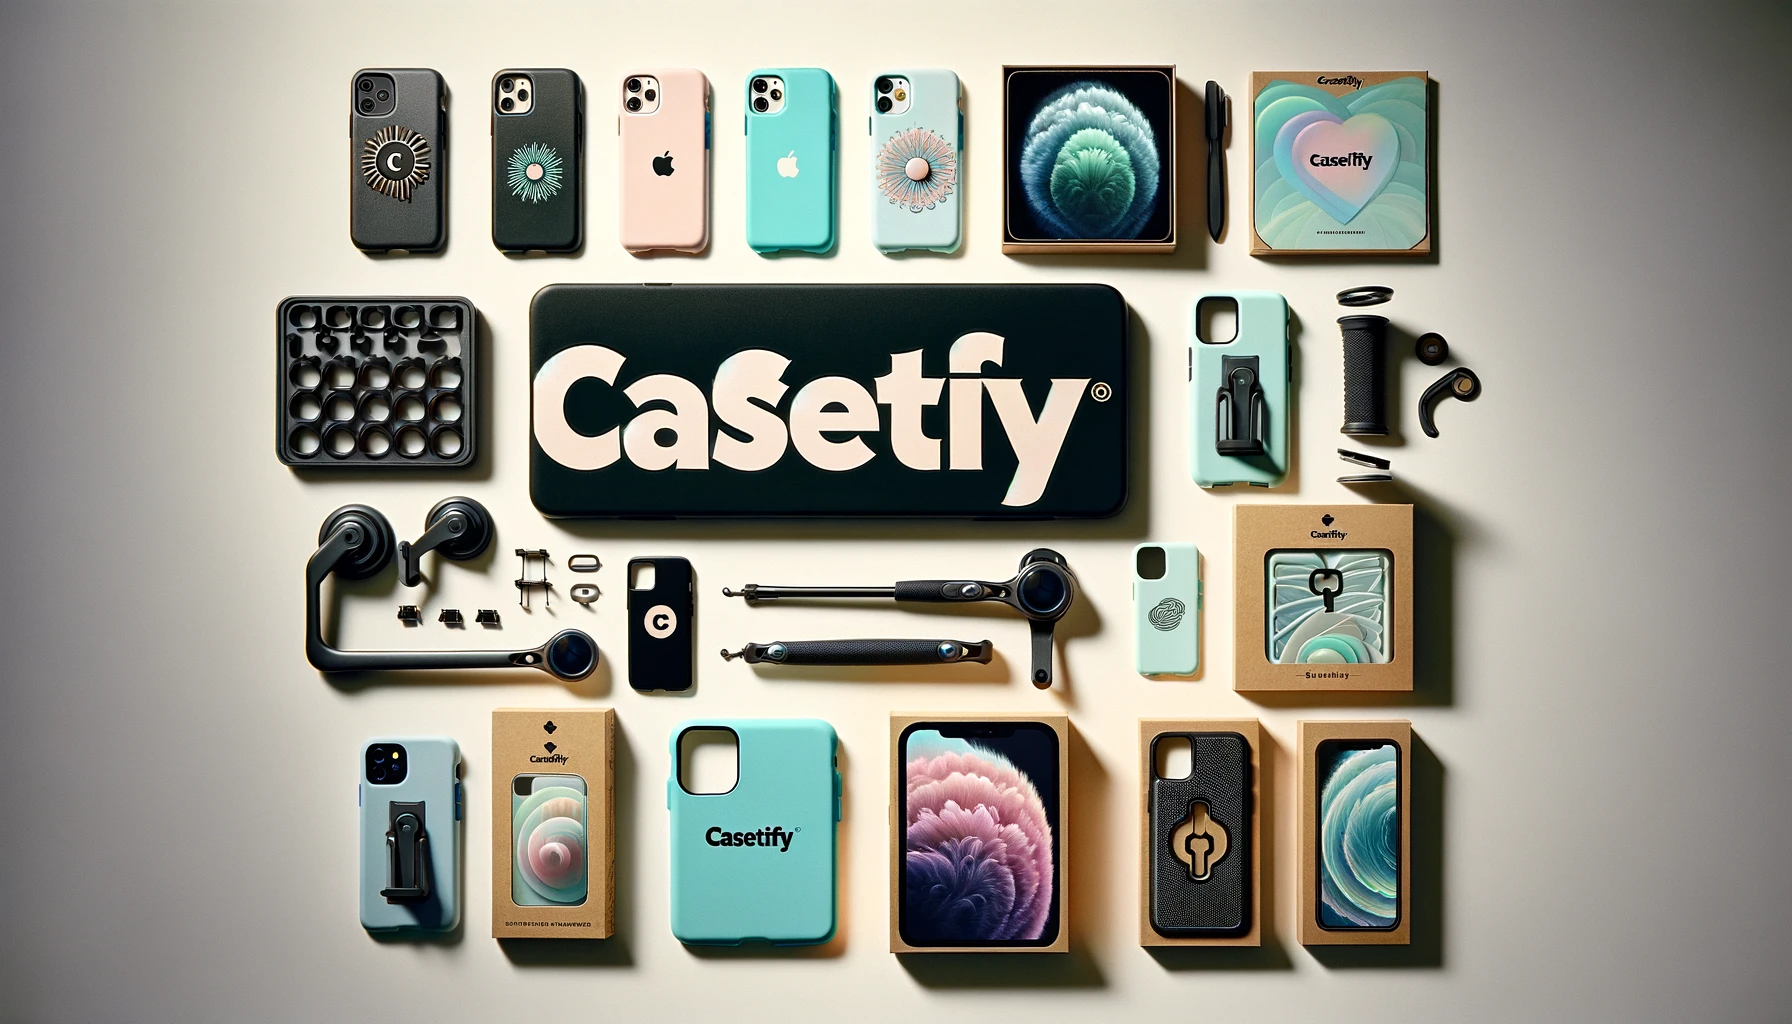 An image displaying various accessories for CASETiFY phone cases. Include items like grips, stands, and screen protectors with the word 'CASETiFY' prominently displayed.